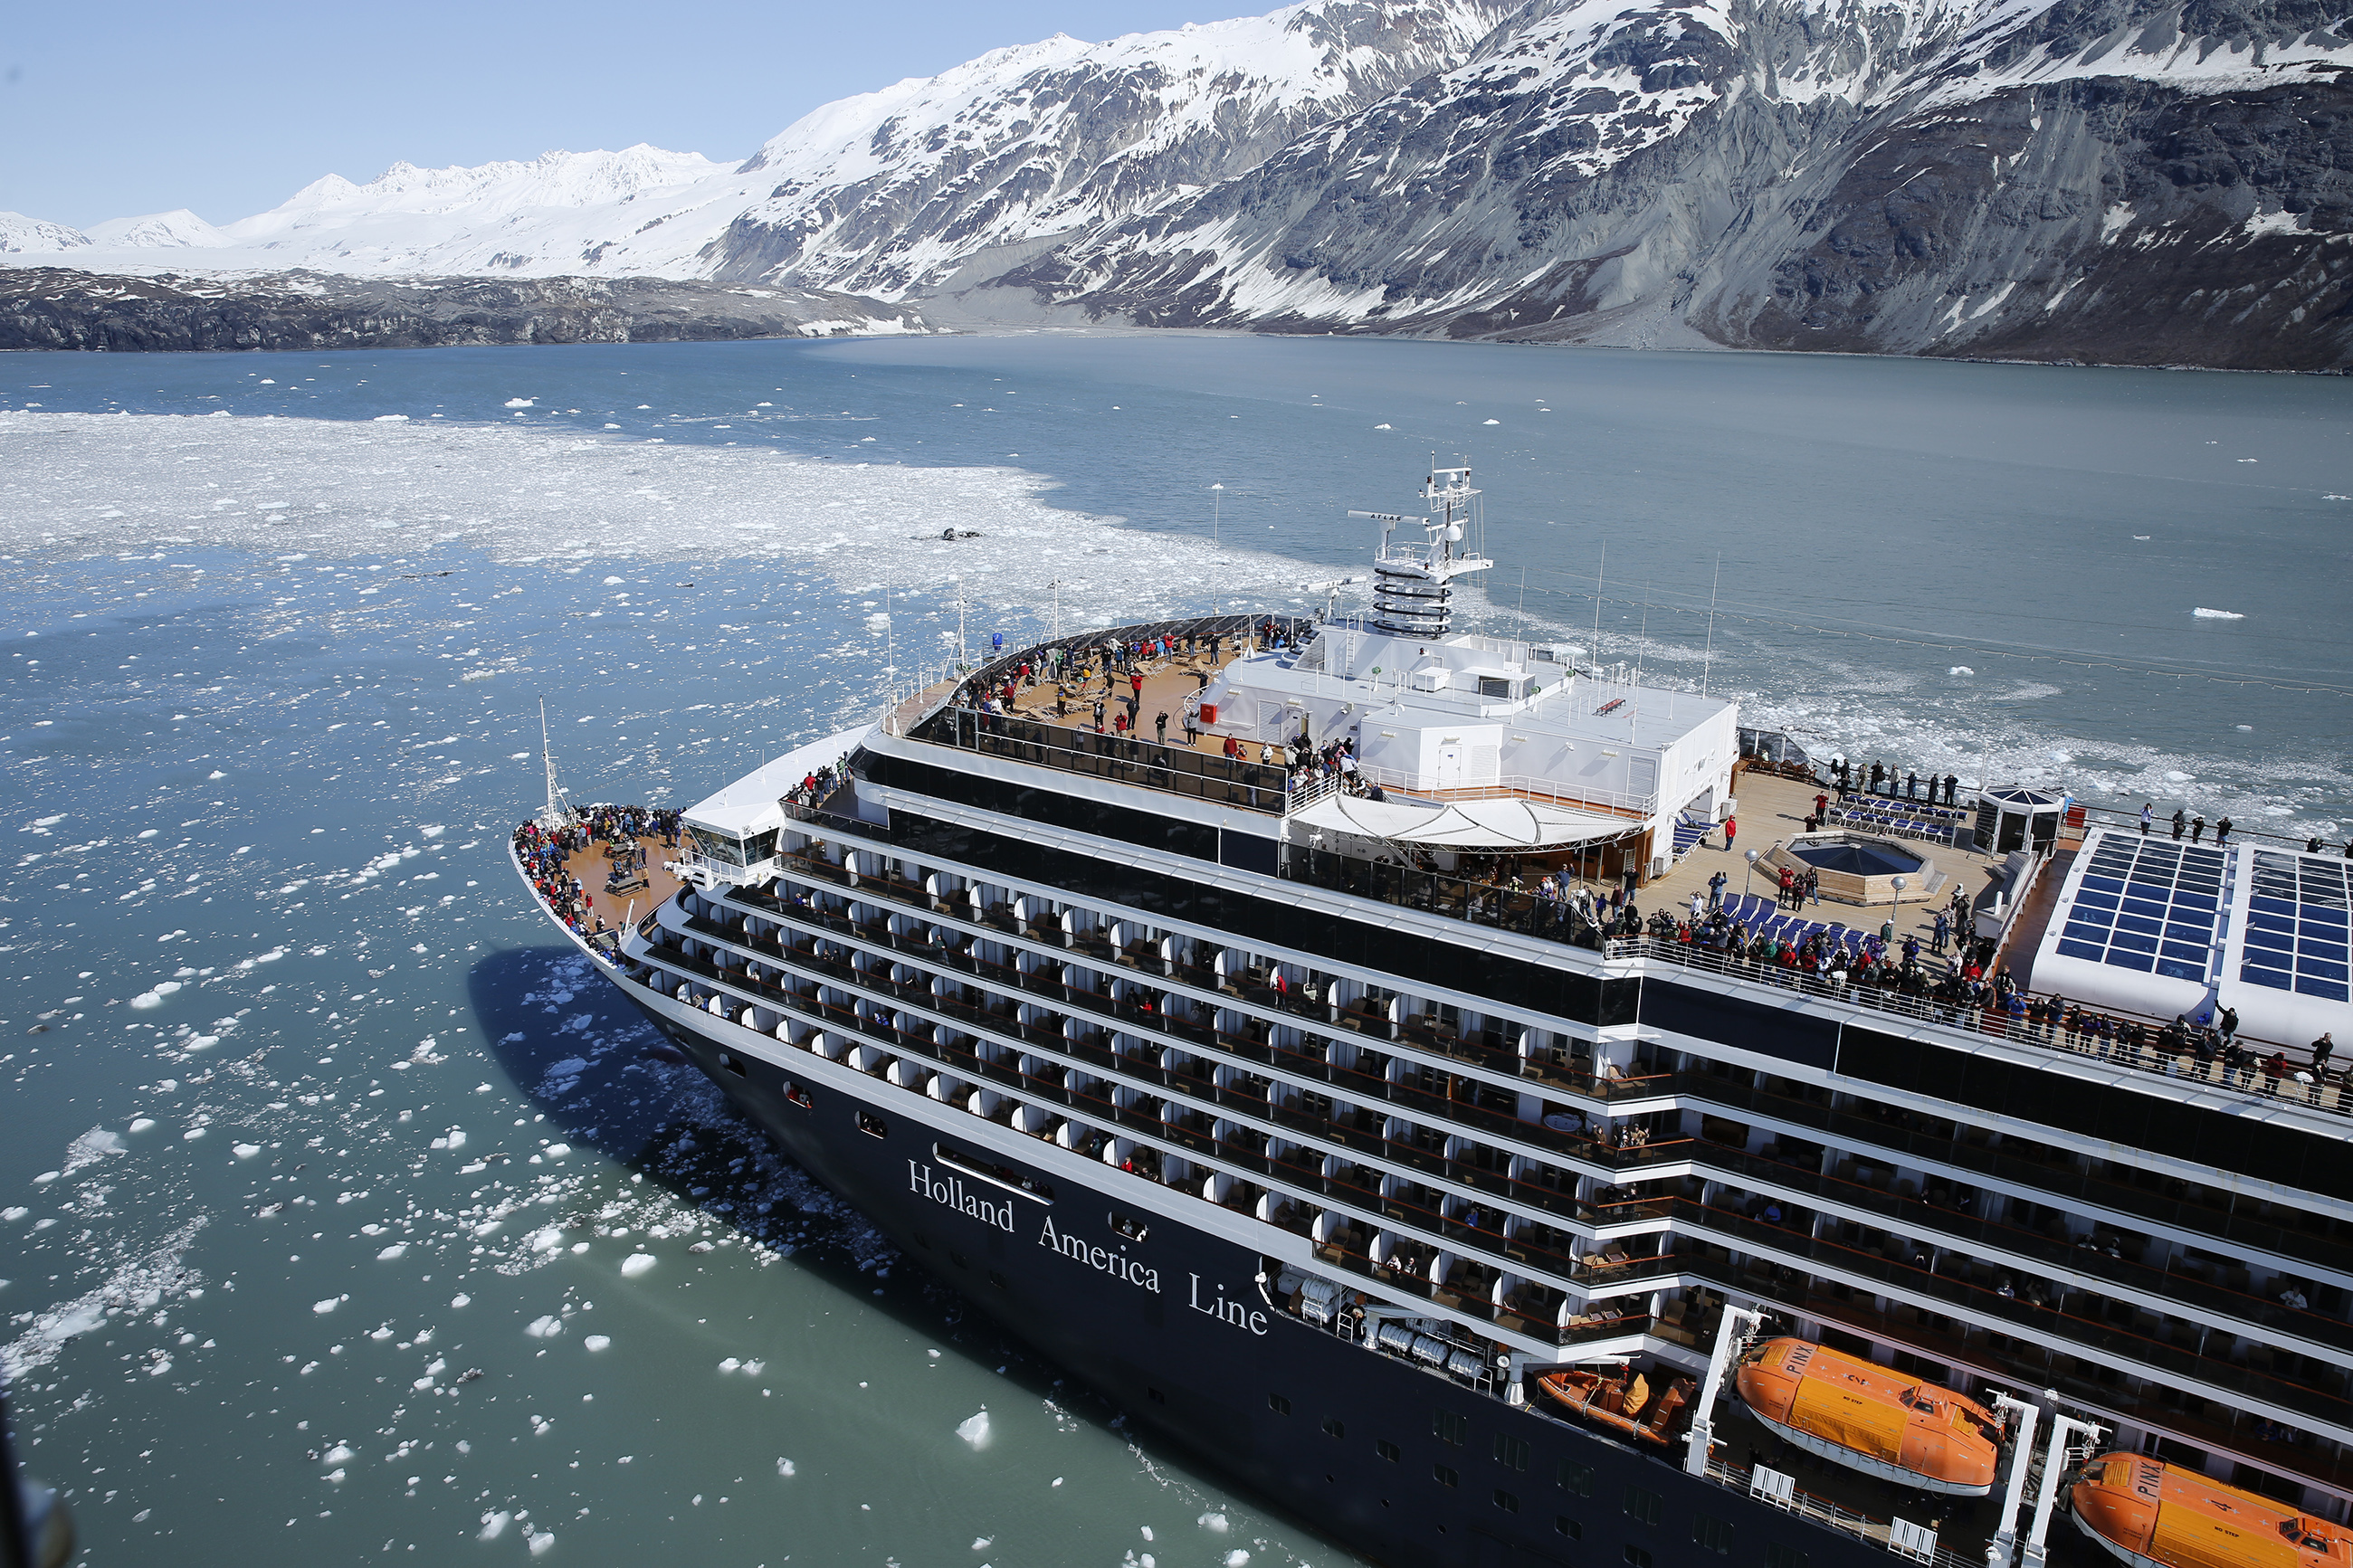 For cruising to Alaska, Holland America Line offers the most glacier viewing with more Glacier Bay permits than other lines and the most opportunities to see wildlife and wilderness.